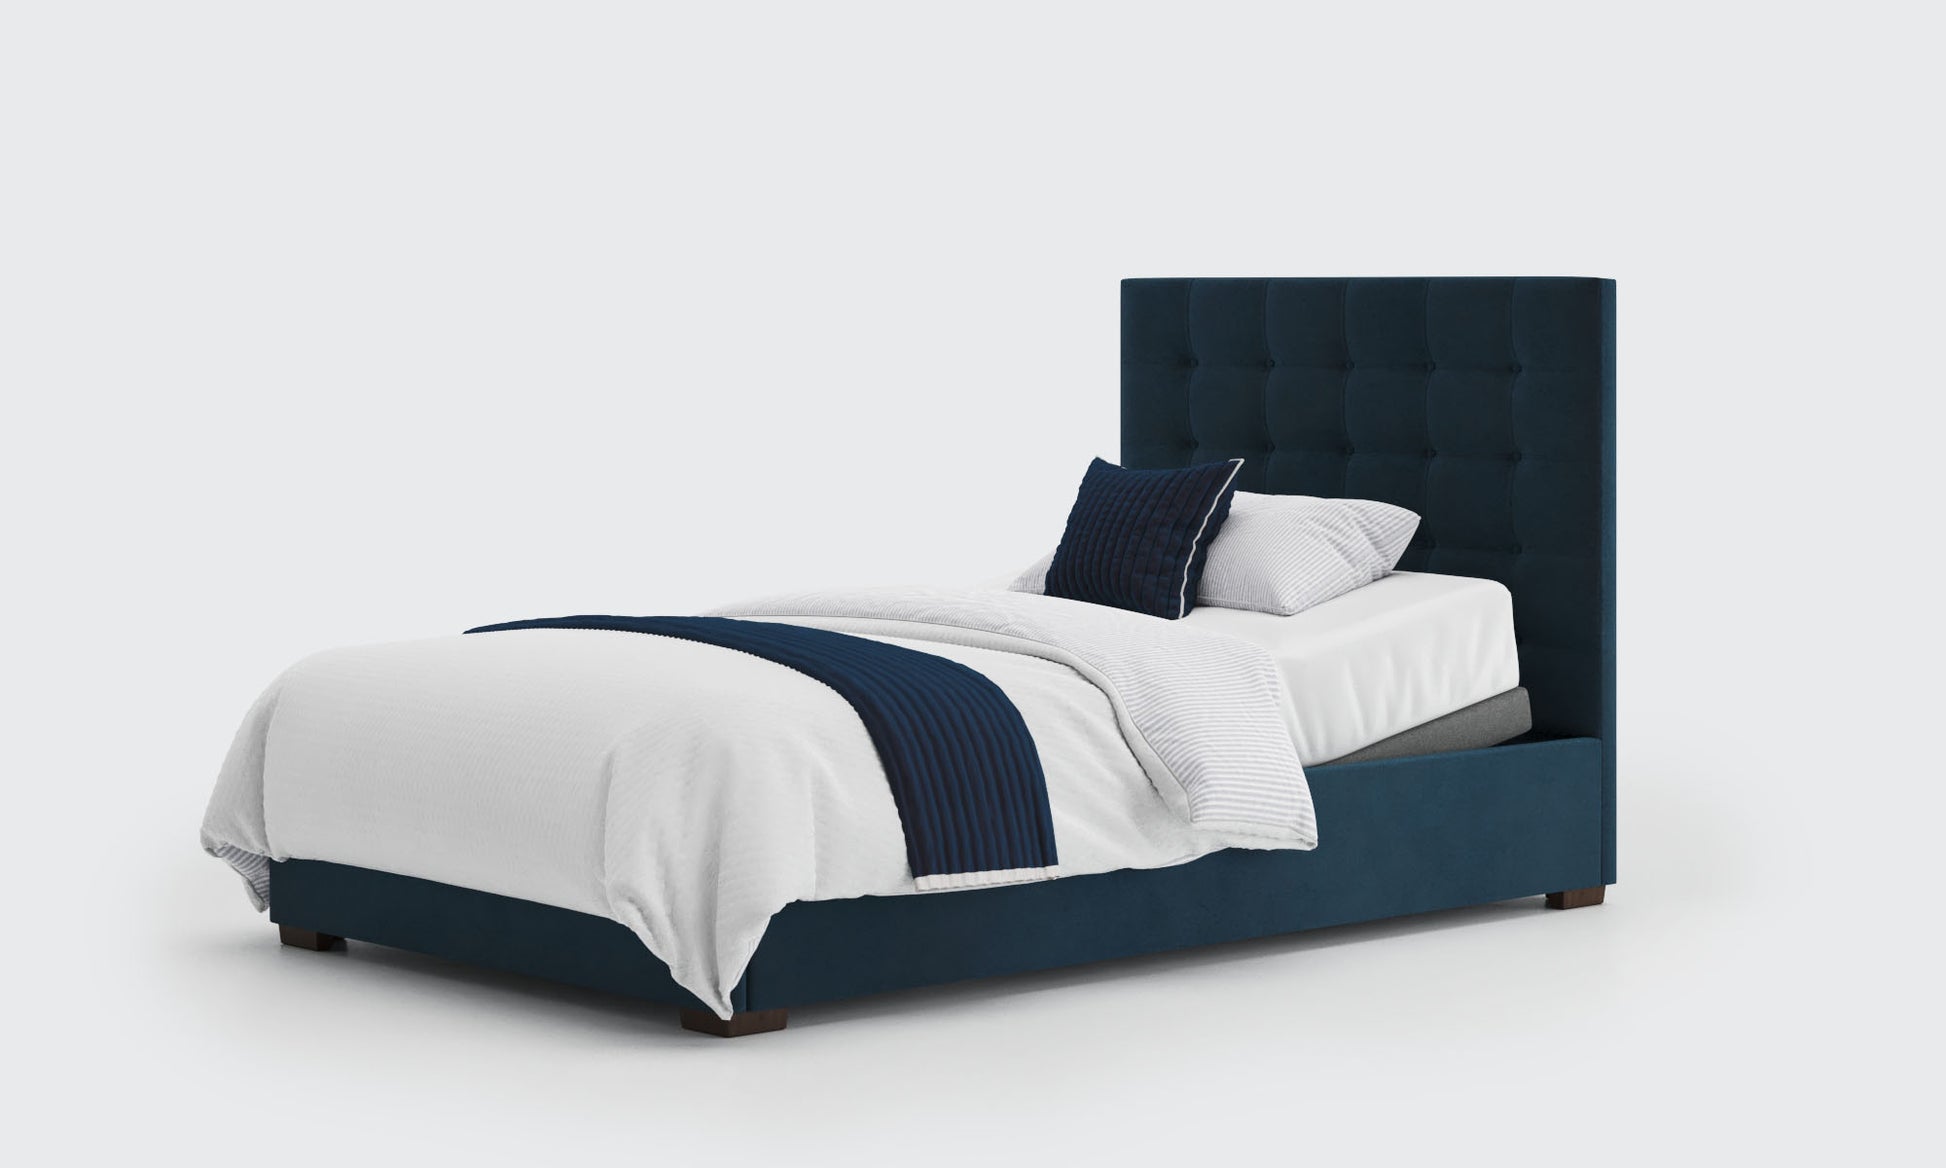 yorke 4ft small double bed and mattress in the royal velvet material